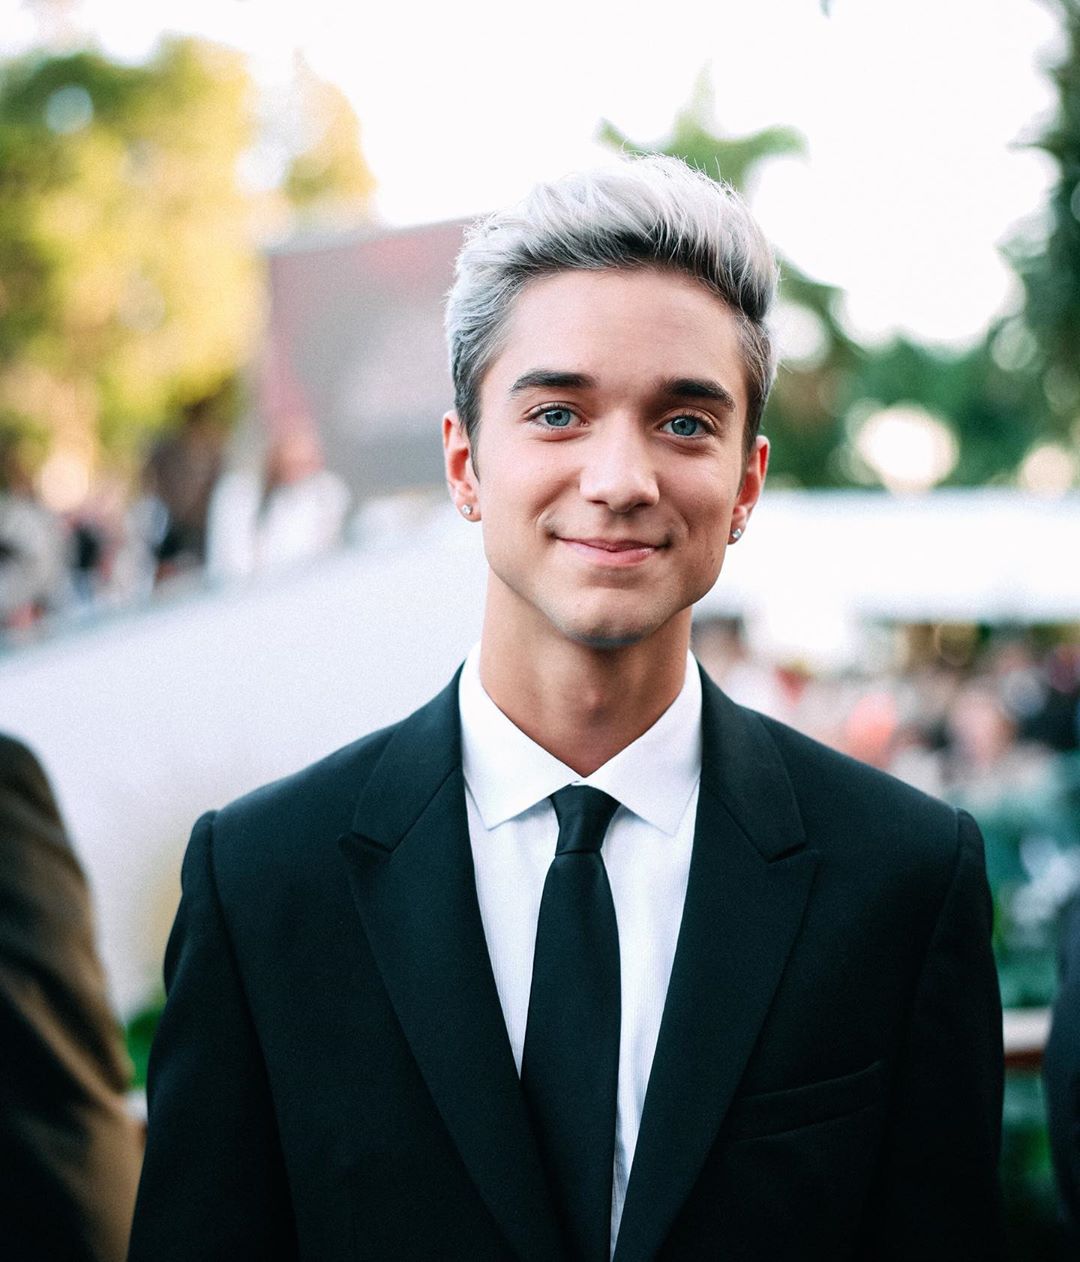 Daniel Seavey Wearing a Suit and Tie